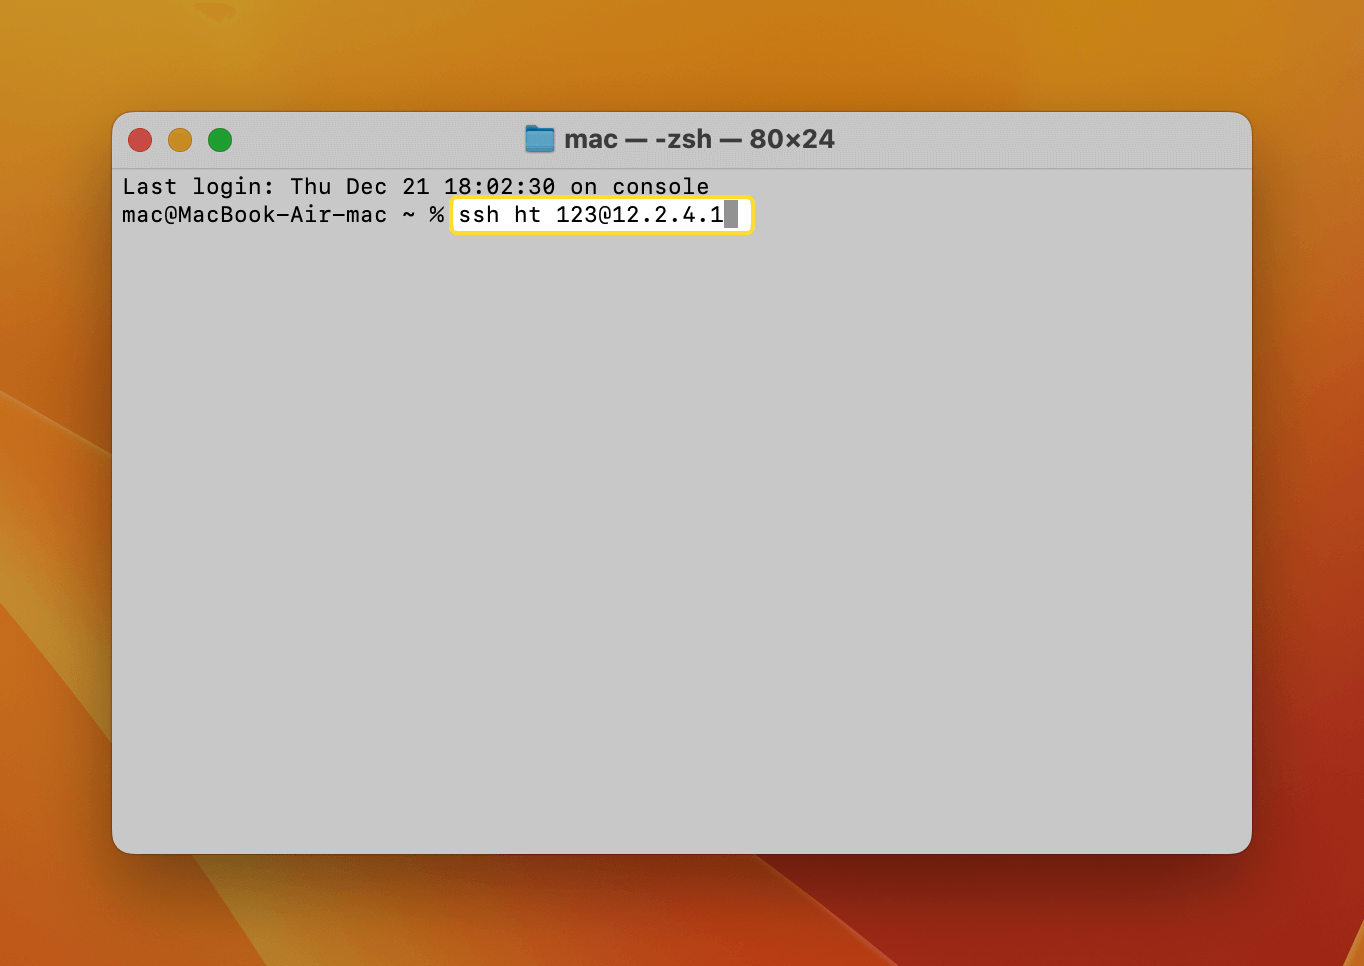 The command for establishing the SSH connection is shown in the Mac Terminal window